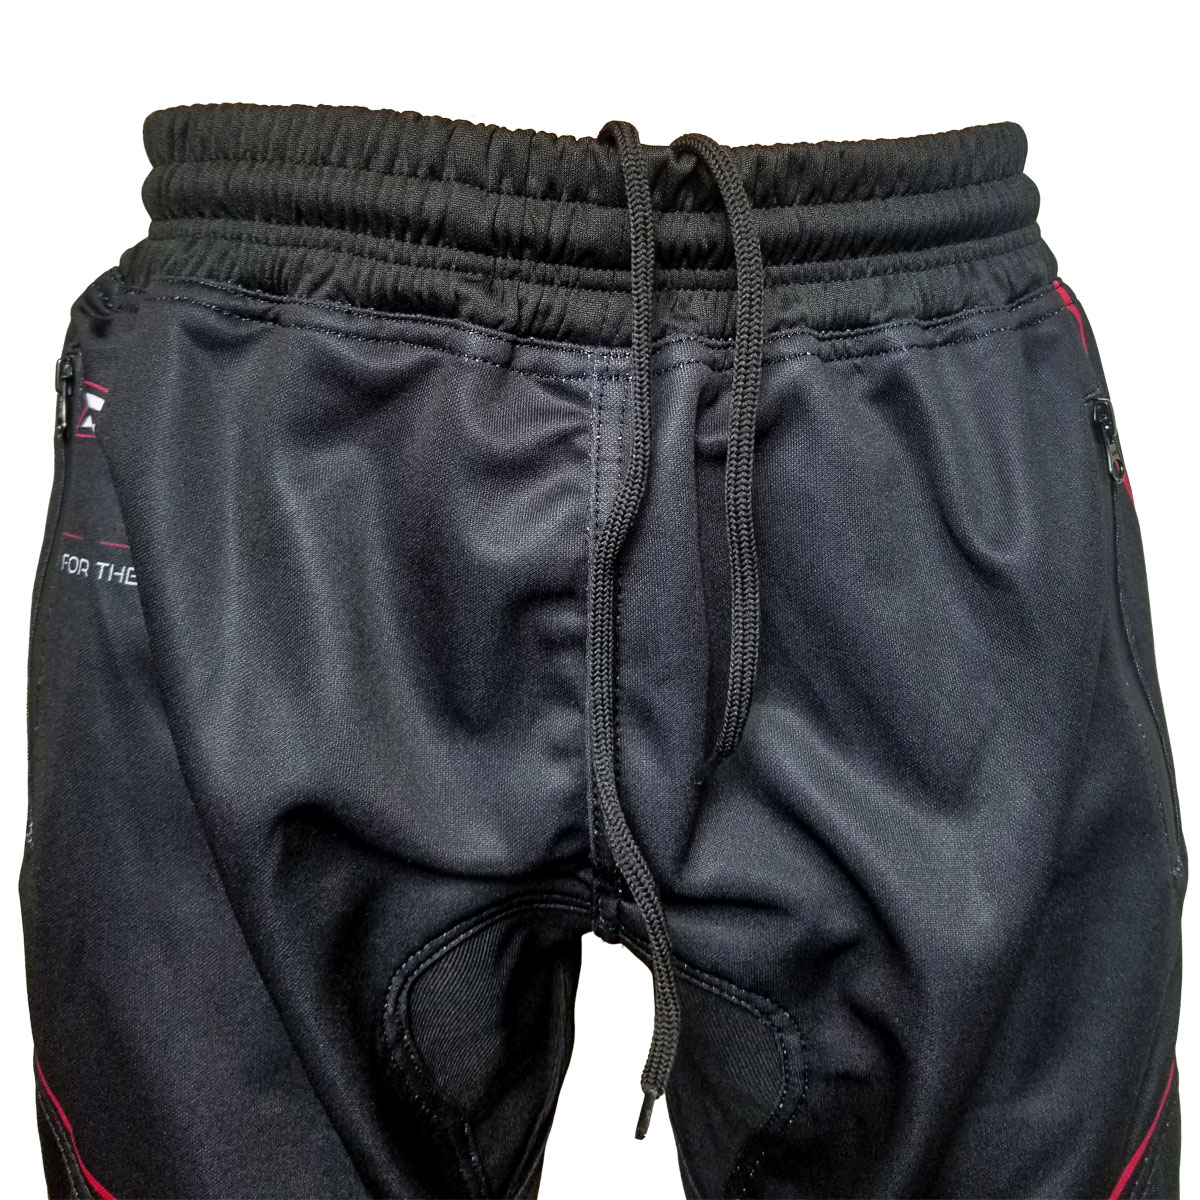 Small Details about   Fearless Paintball Jogger Pants Black Fade Size 